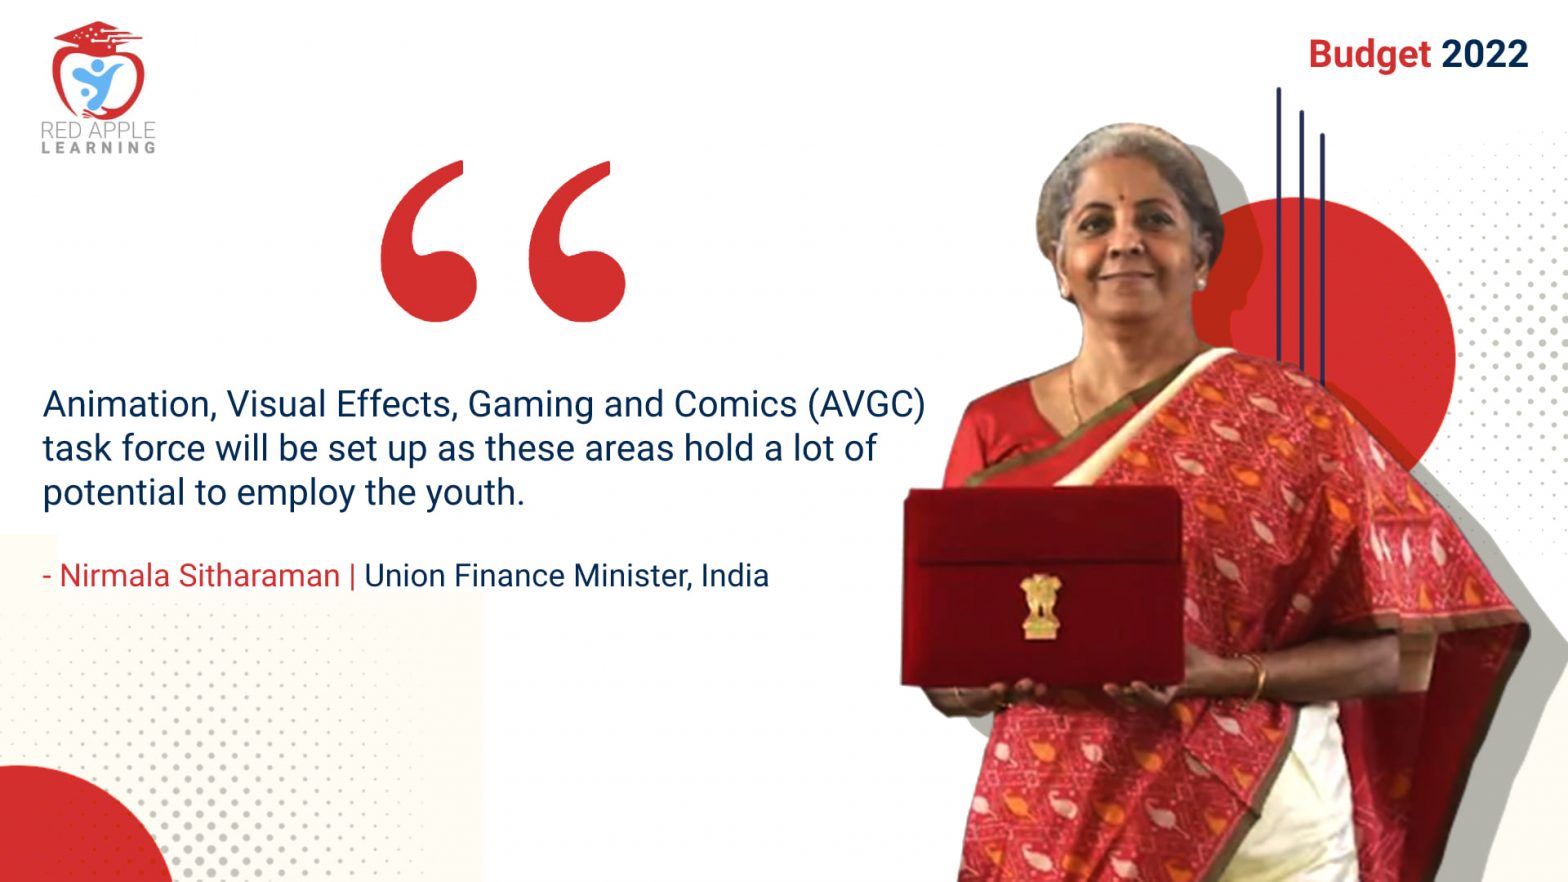 Union budget 2022 AVGC Task Force to Boost the Gaming Sector